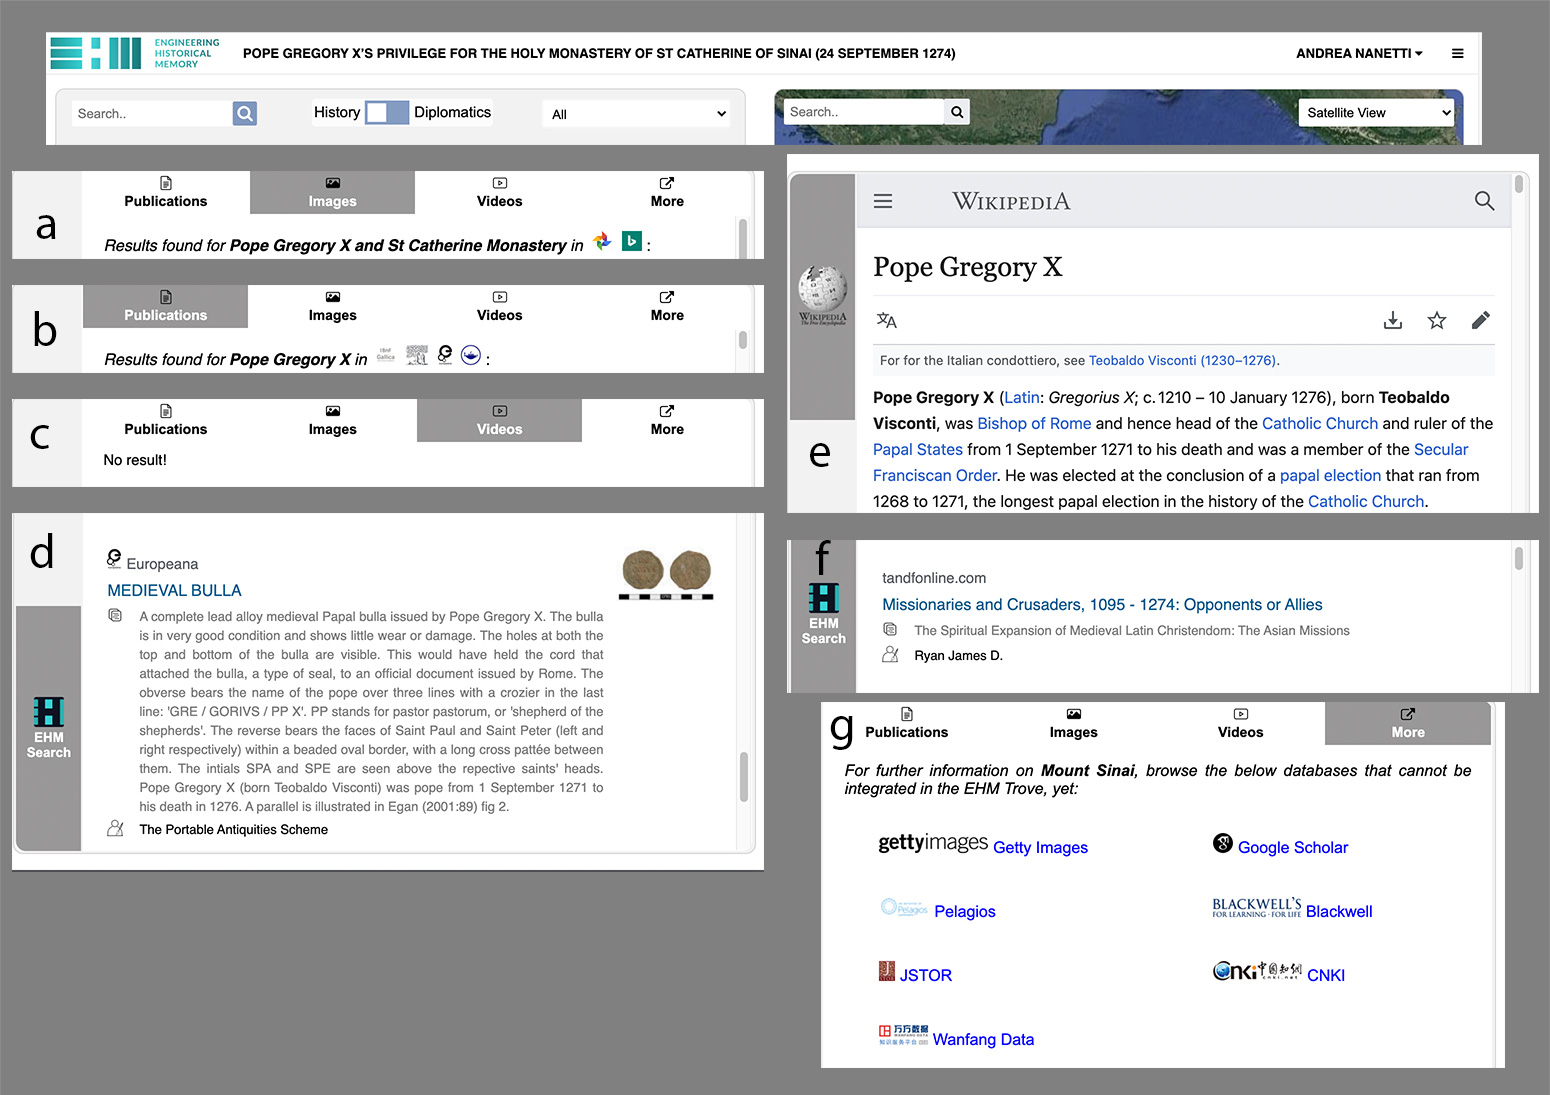 Screenshots of EHM Search Engines for scholarly texts (b, d, f), images (a), and videos (c) related to the individual diplomatics , historical , and geographical entities itemised in the online application for pope Gregory X’s privilege for the monastic community of Mount Sinai (1274). The identifier of the item is the corresponding Wikipedia page (e).